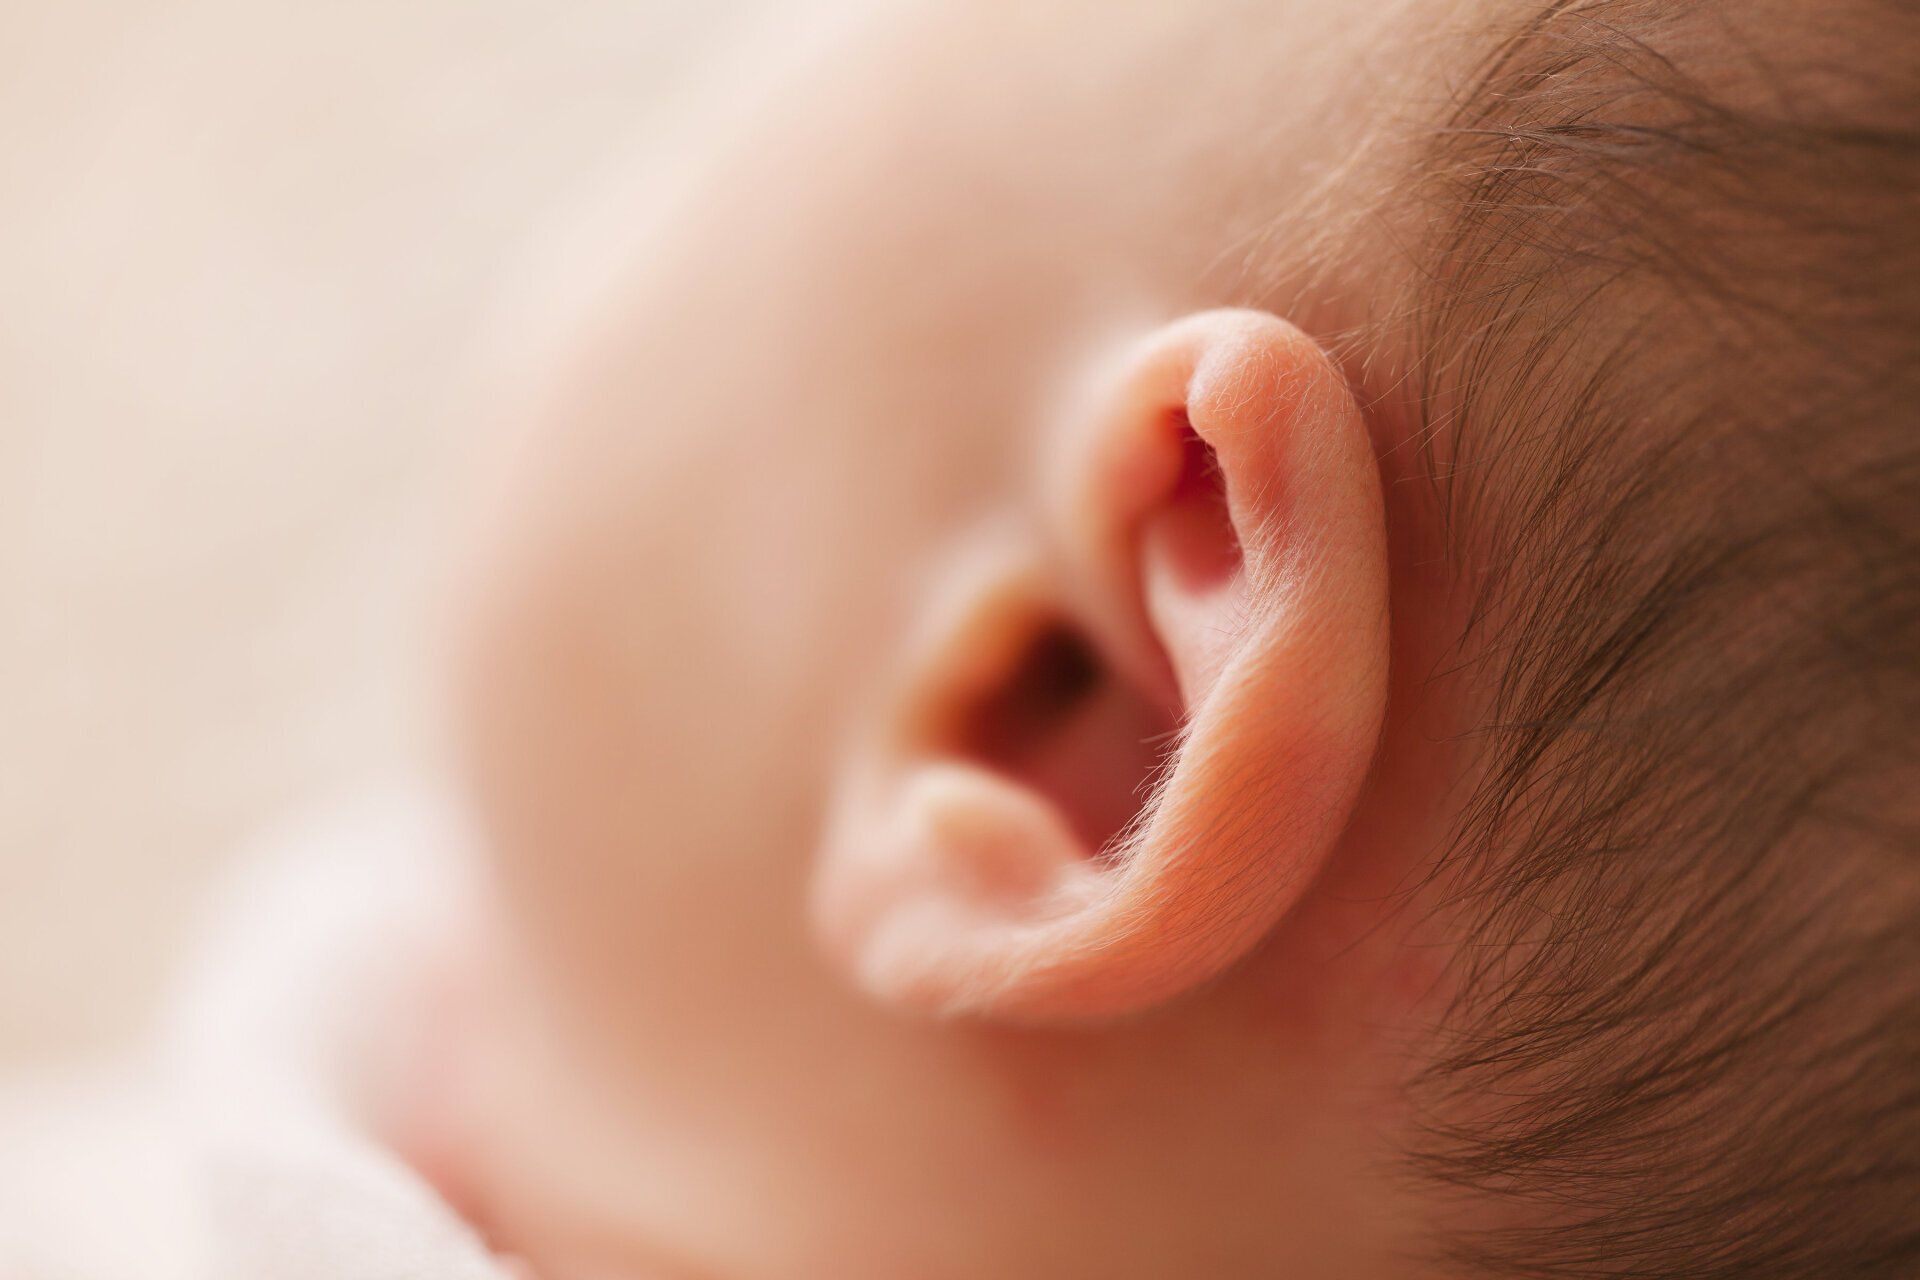 the side of a baby's head showing the ear